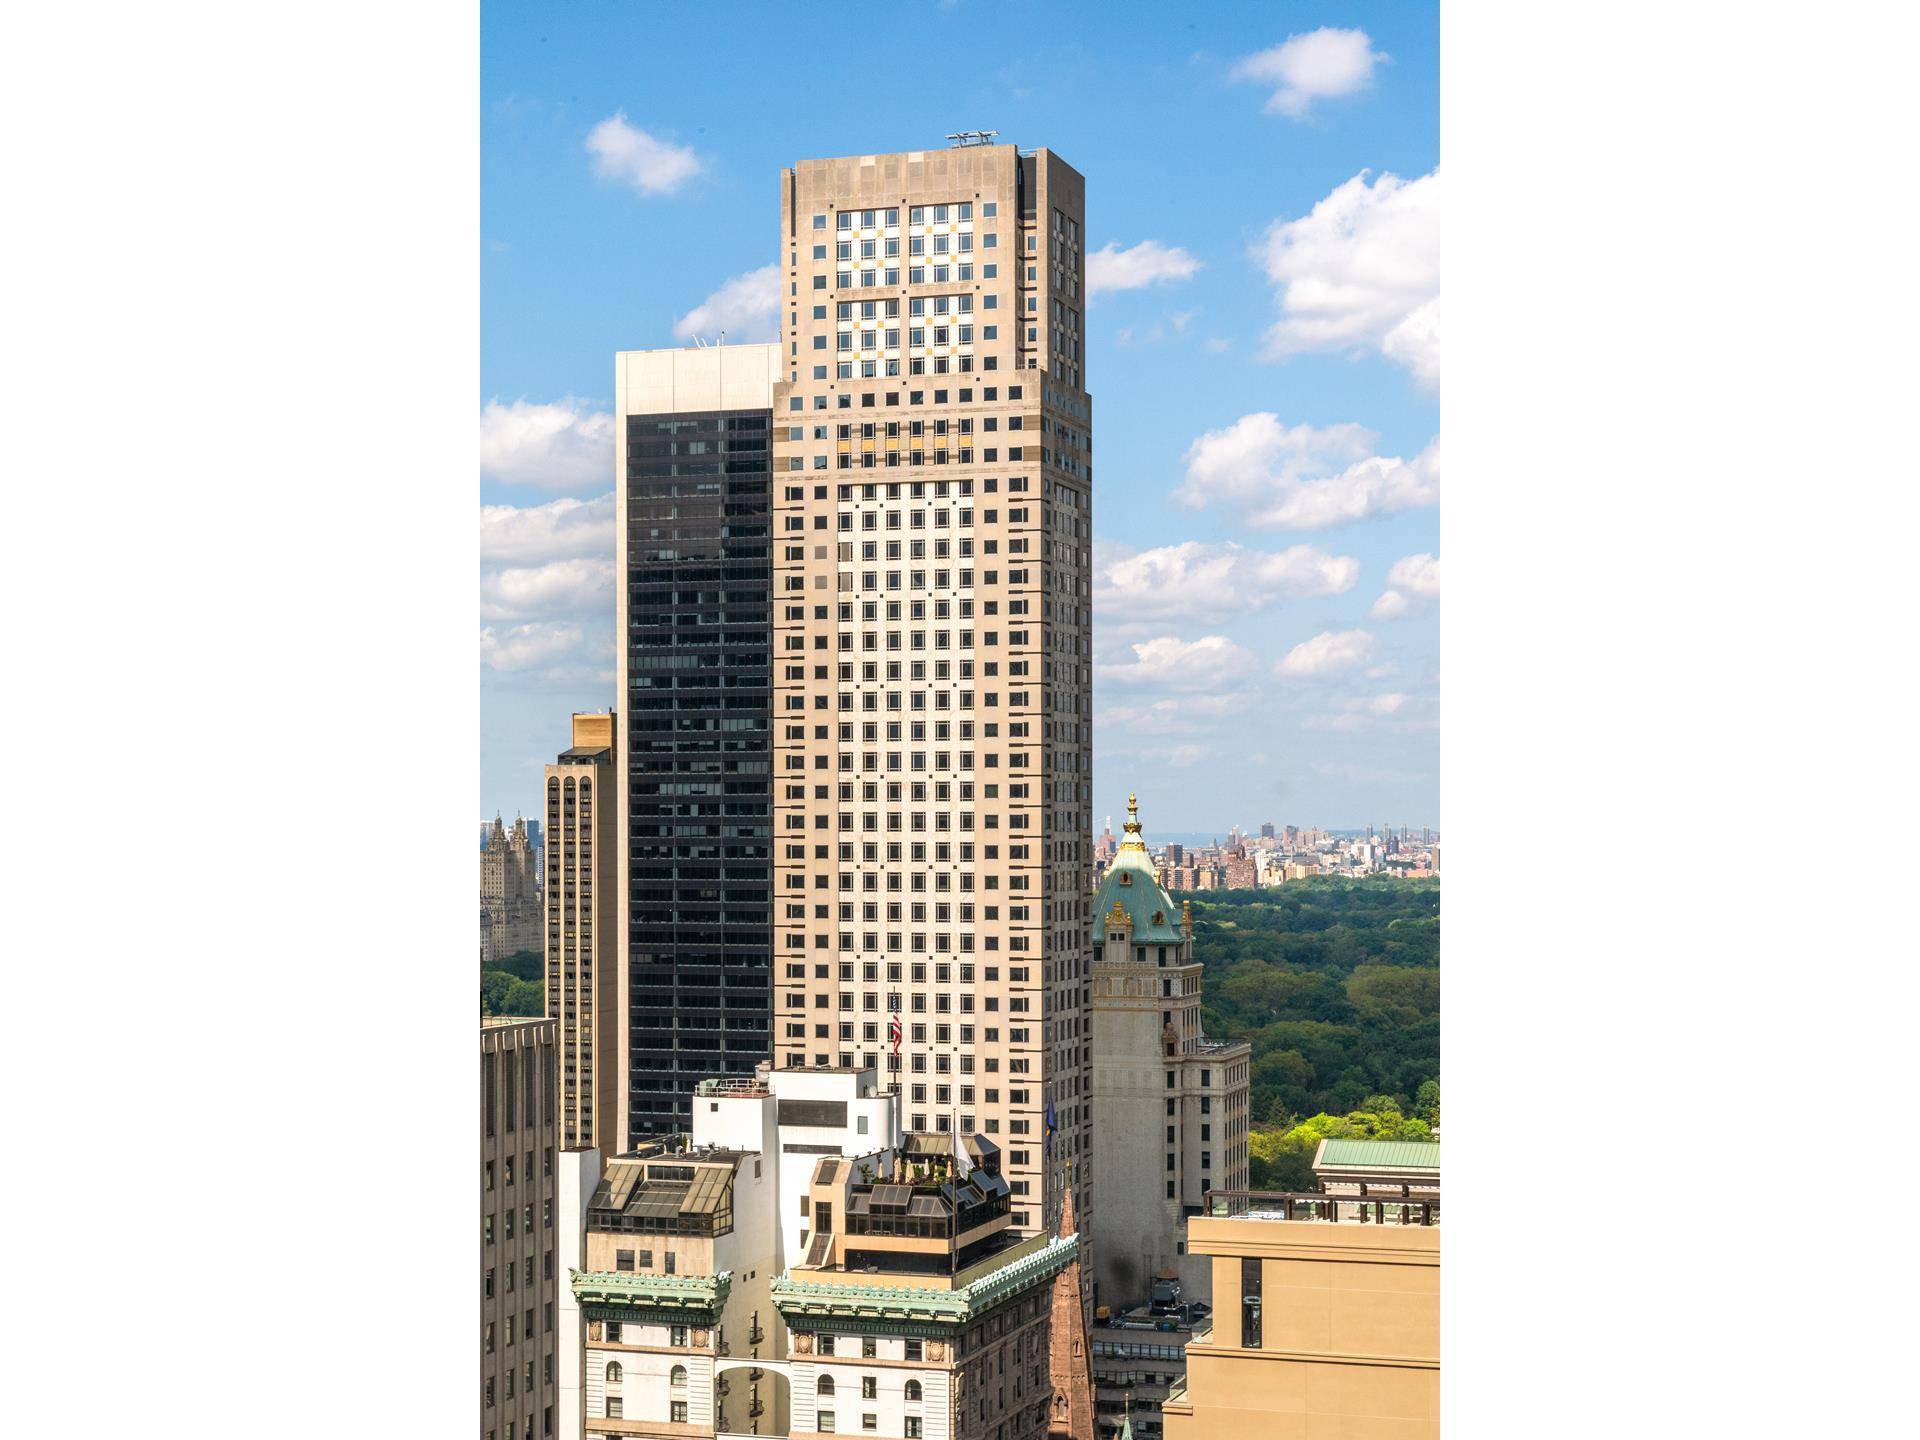 Just Listed at Olympic Tower on the 30th Floor Three Bedrooms amp ; Separate Office, Four Baths, 3083 Sq Ft Impeccable Gut Renovation in Exquisite Taste and Attention to DetailPerfection ...